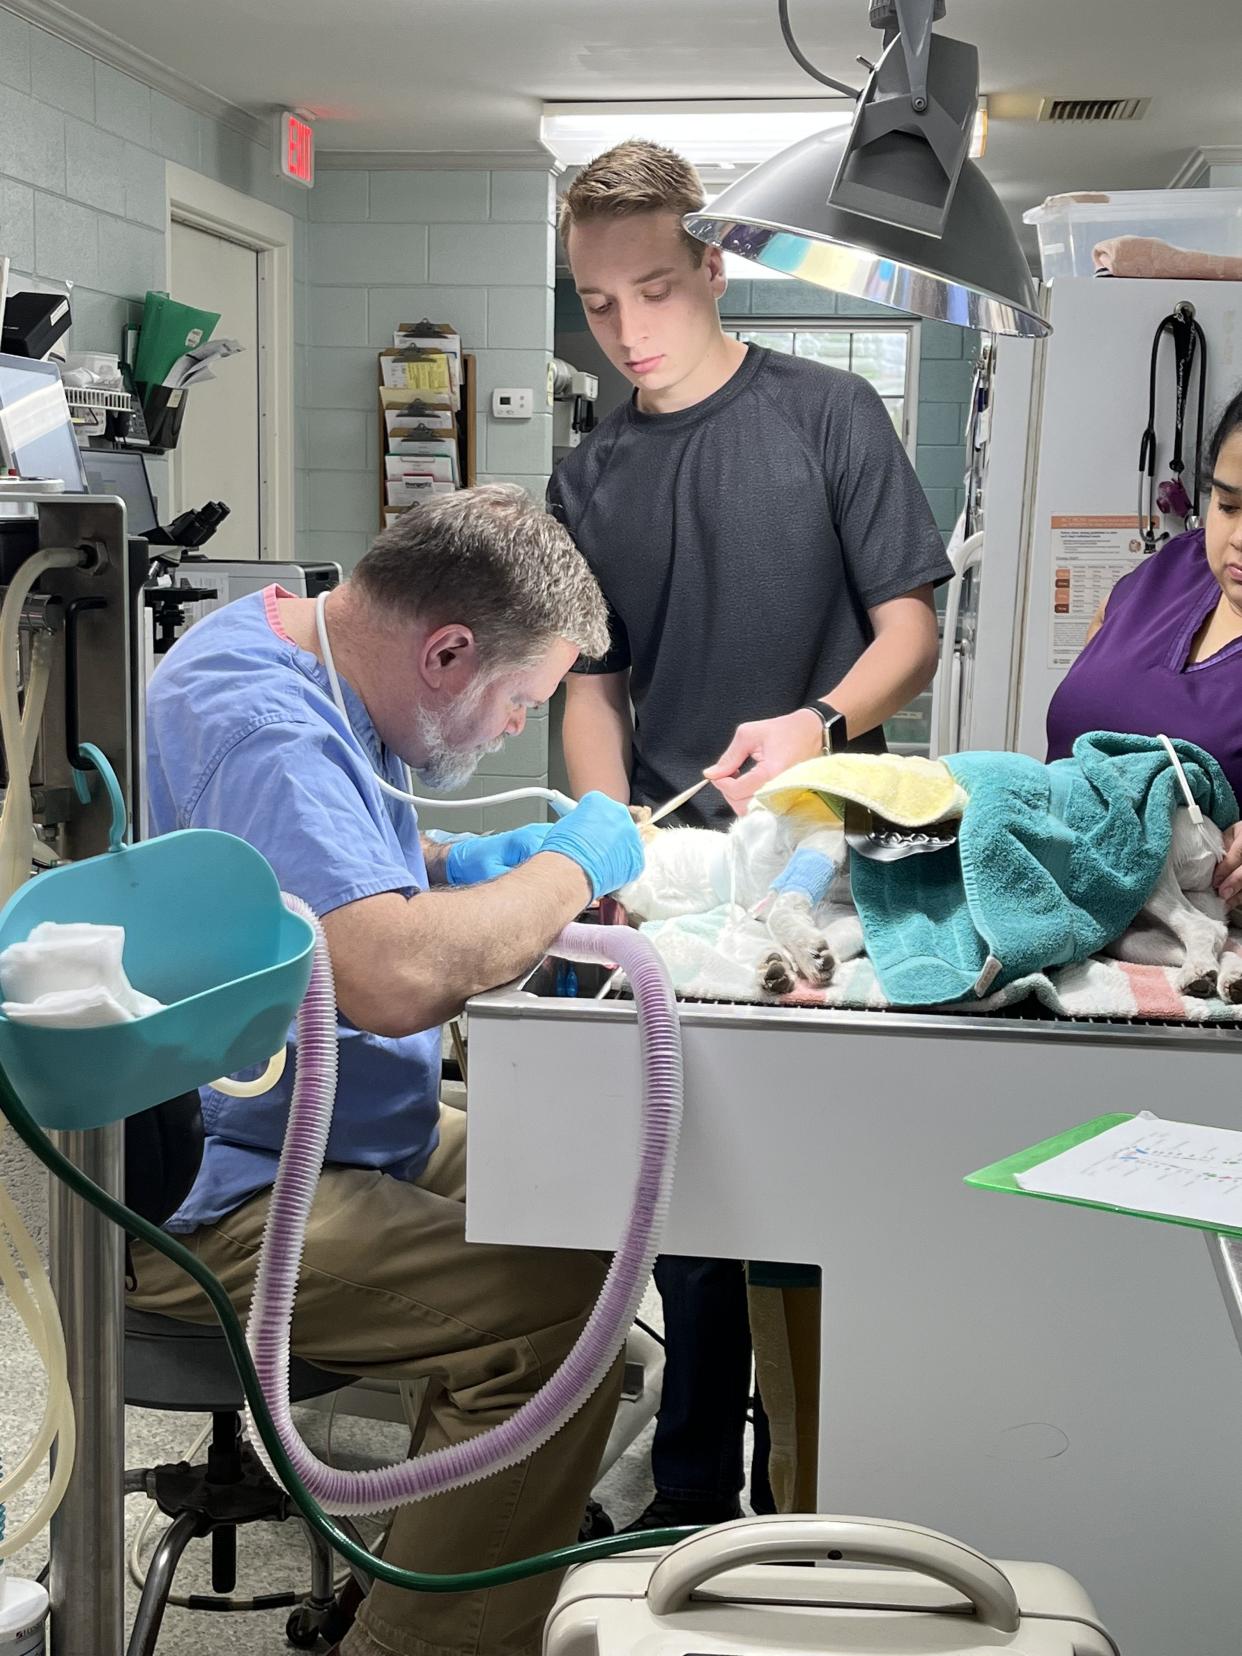 Ian Hunnell, Cleveland County Schools student, recently gained new skills while completing an internship at a veterinarian's office.